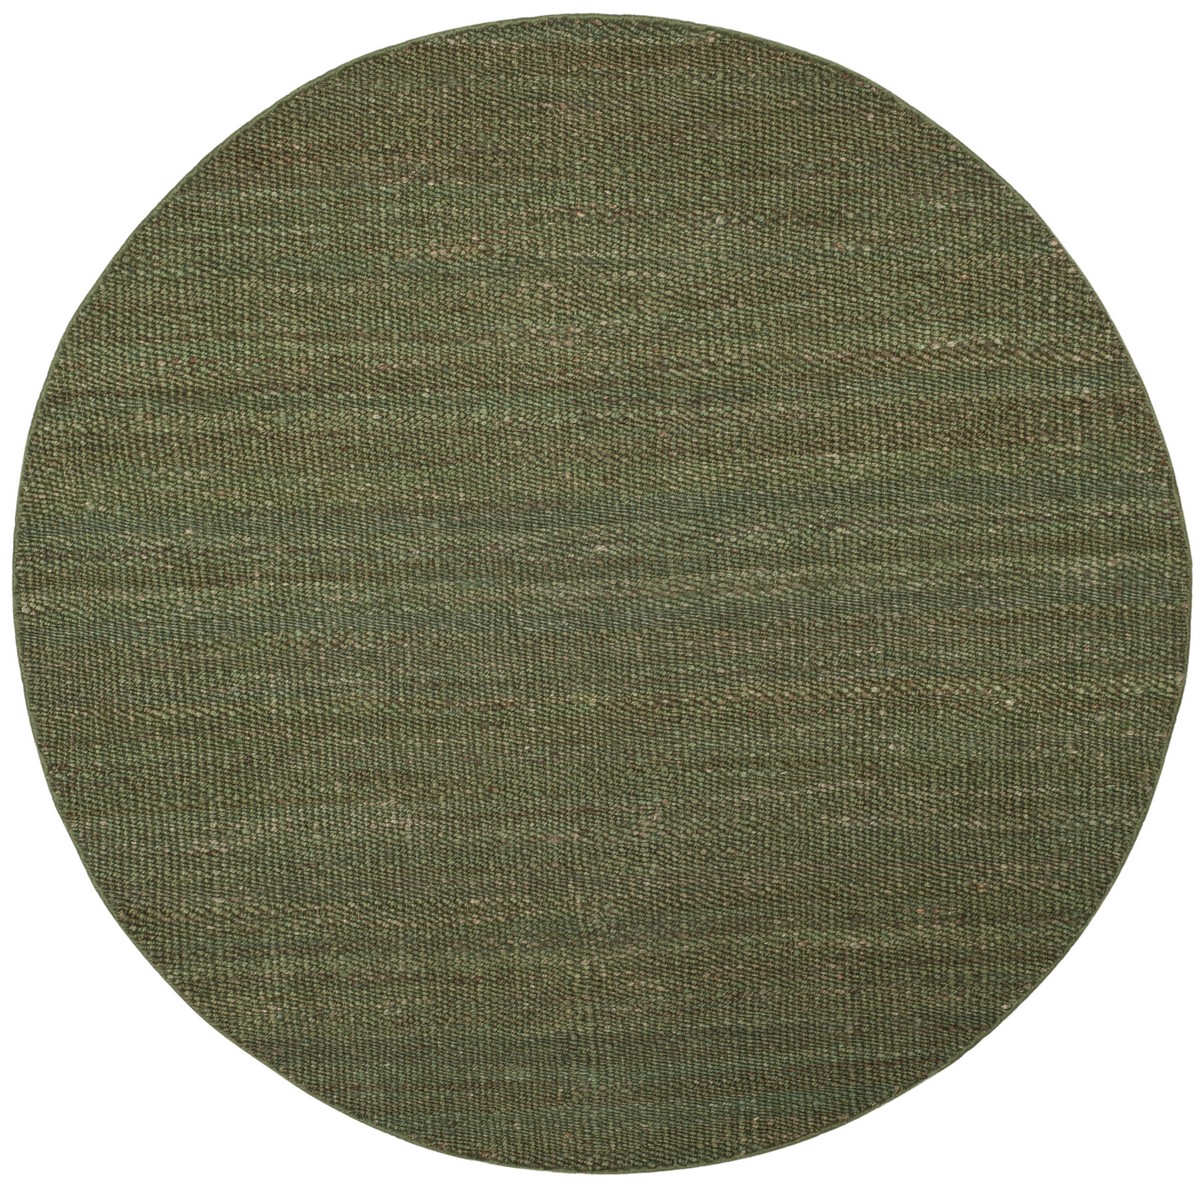 Safavieh NF368G-6R Natural Fiber Hand Woven Round Area Rug, Green - 6 x 6 ft.